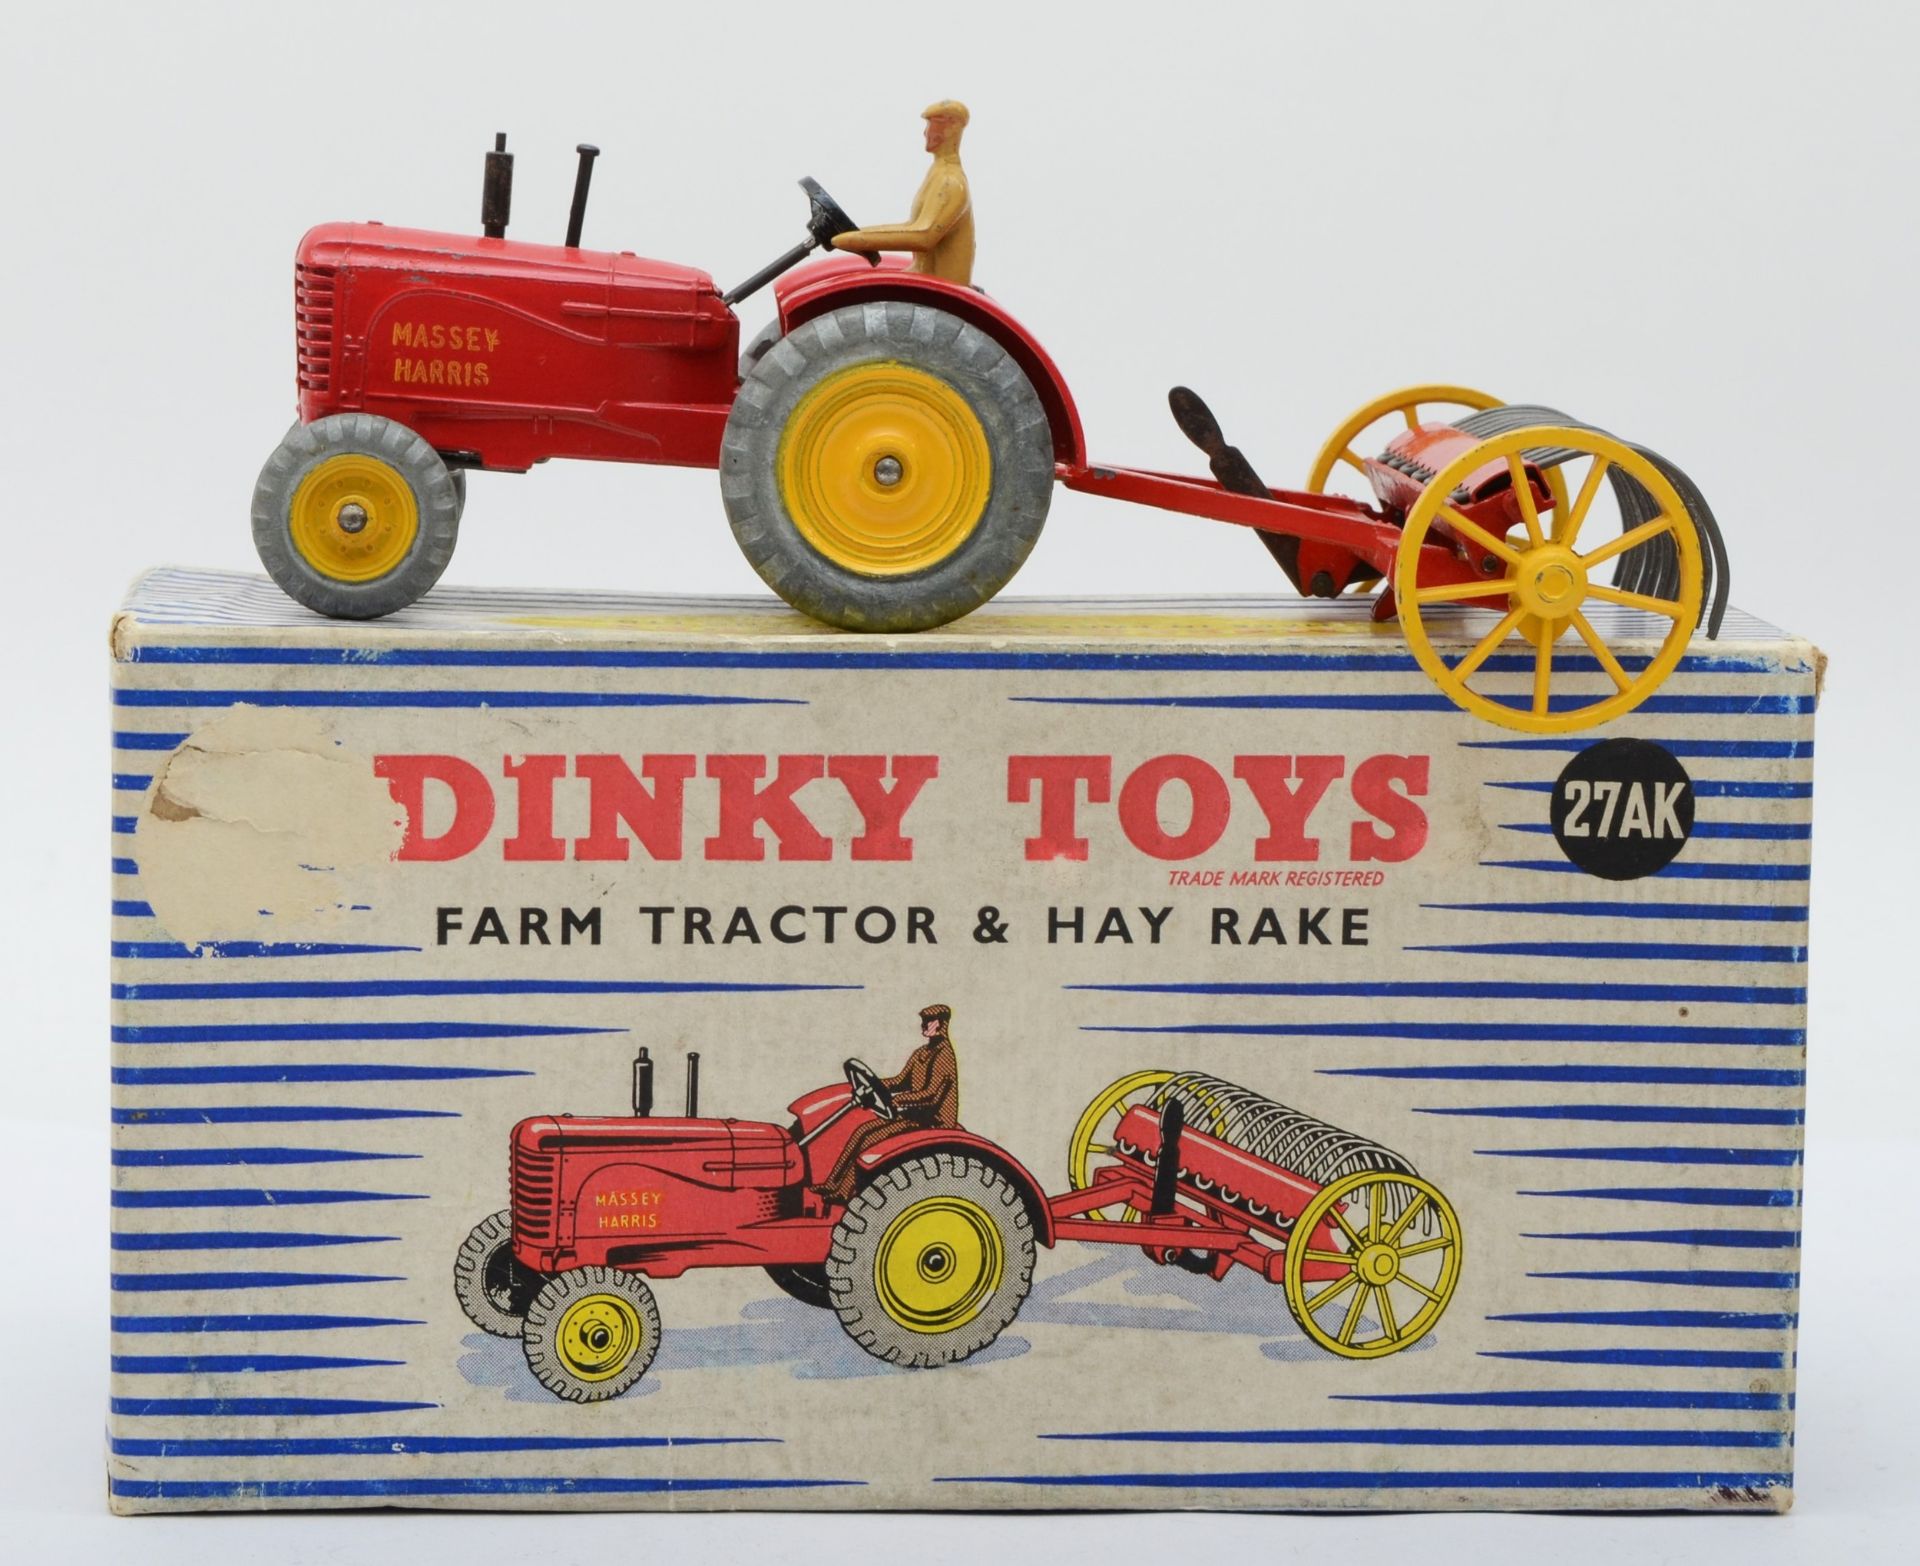 Dinky Toys - A boxed 27AK Farm Tractor & Hay Rake. - Image 2 of 3